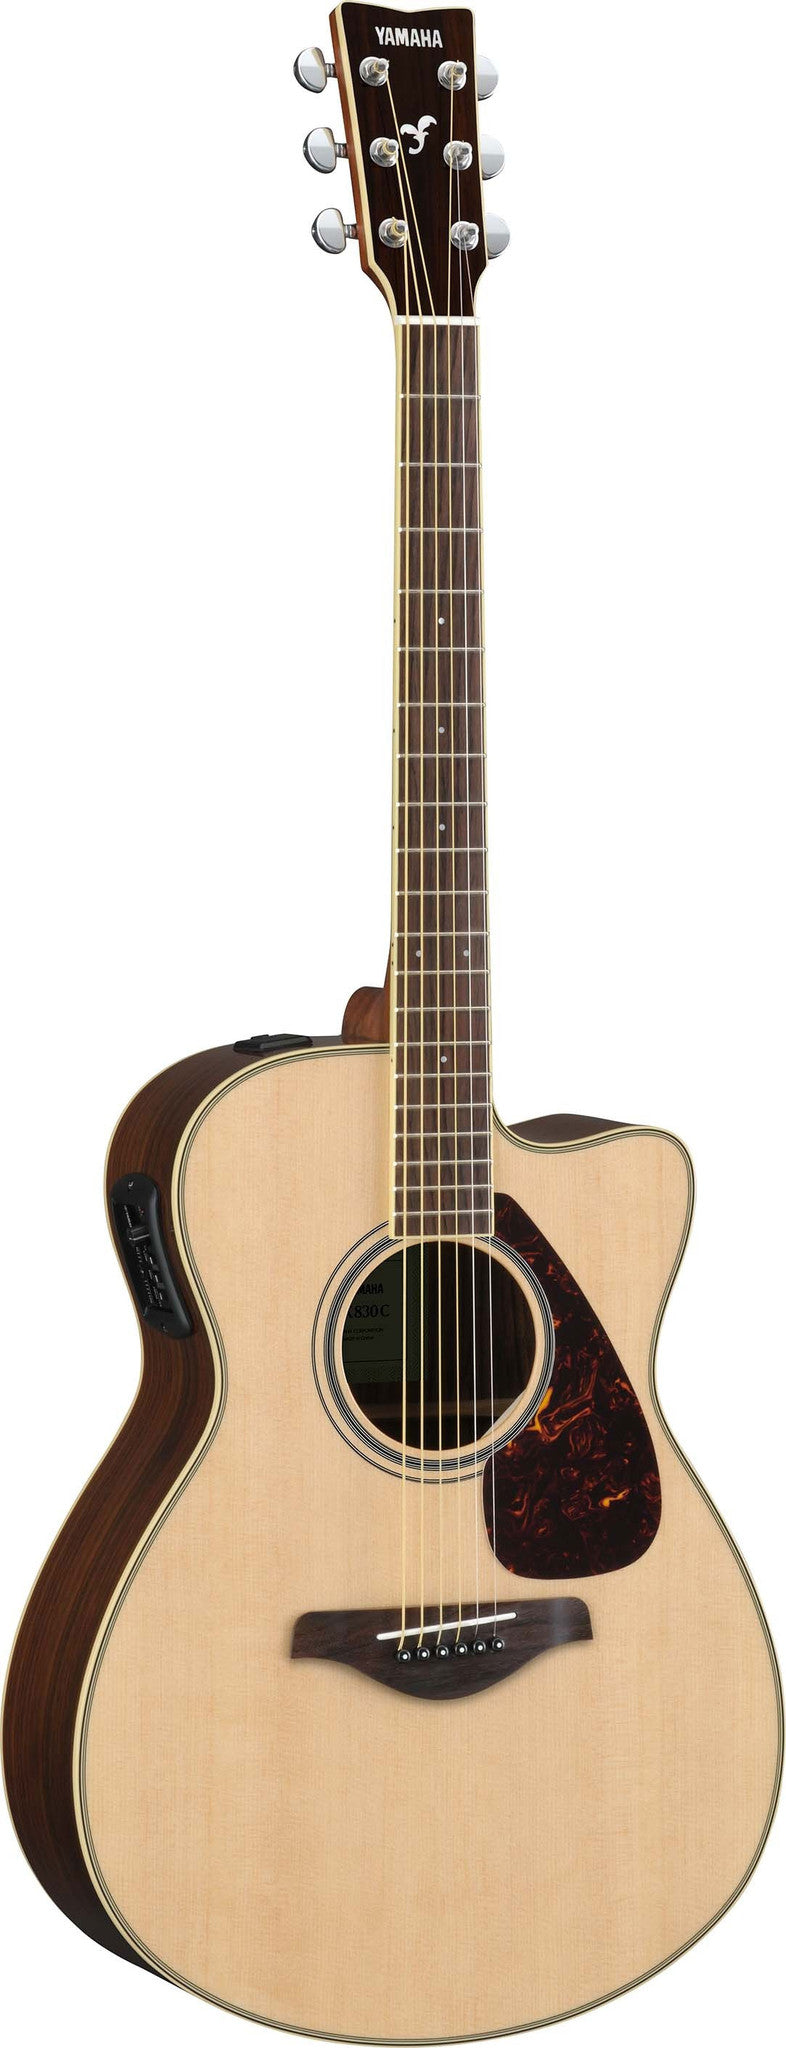 Yamaha FSX830C Small Body Acoustic Electric Guitar